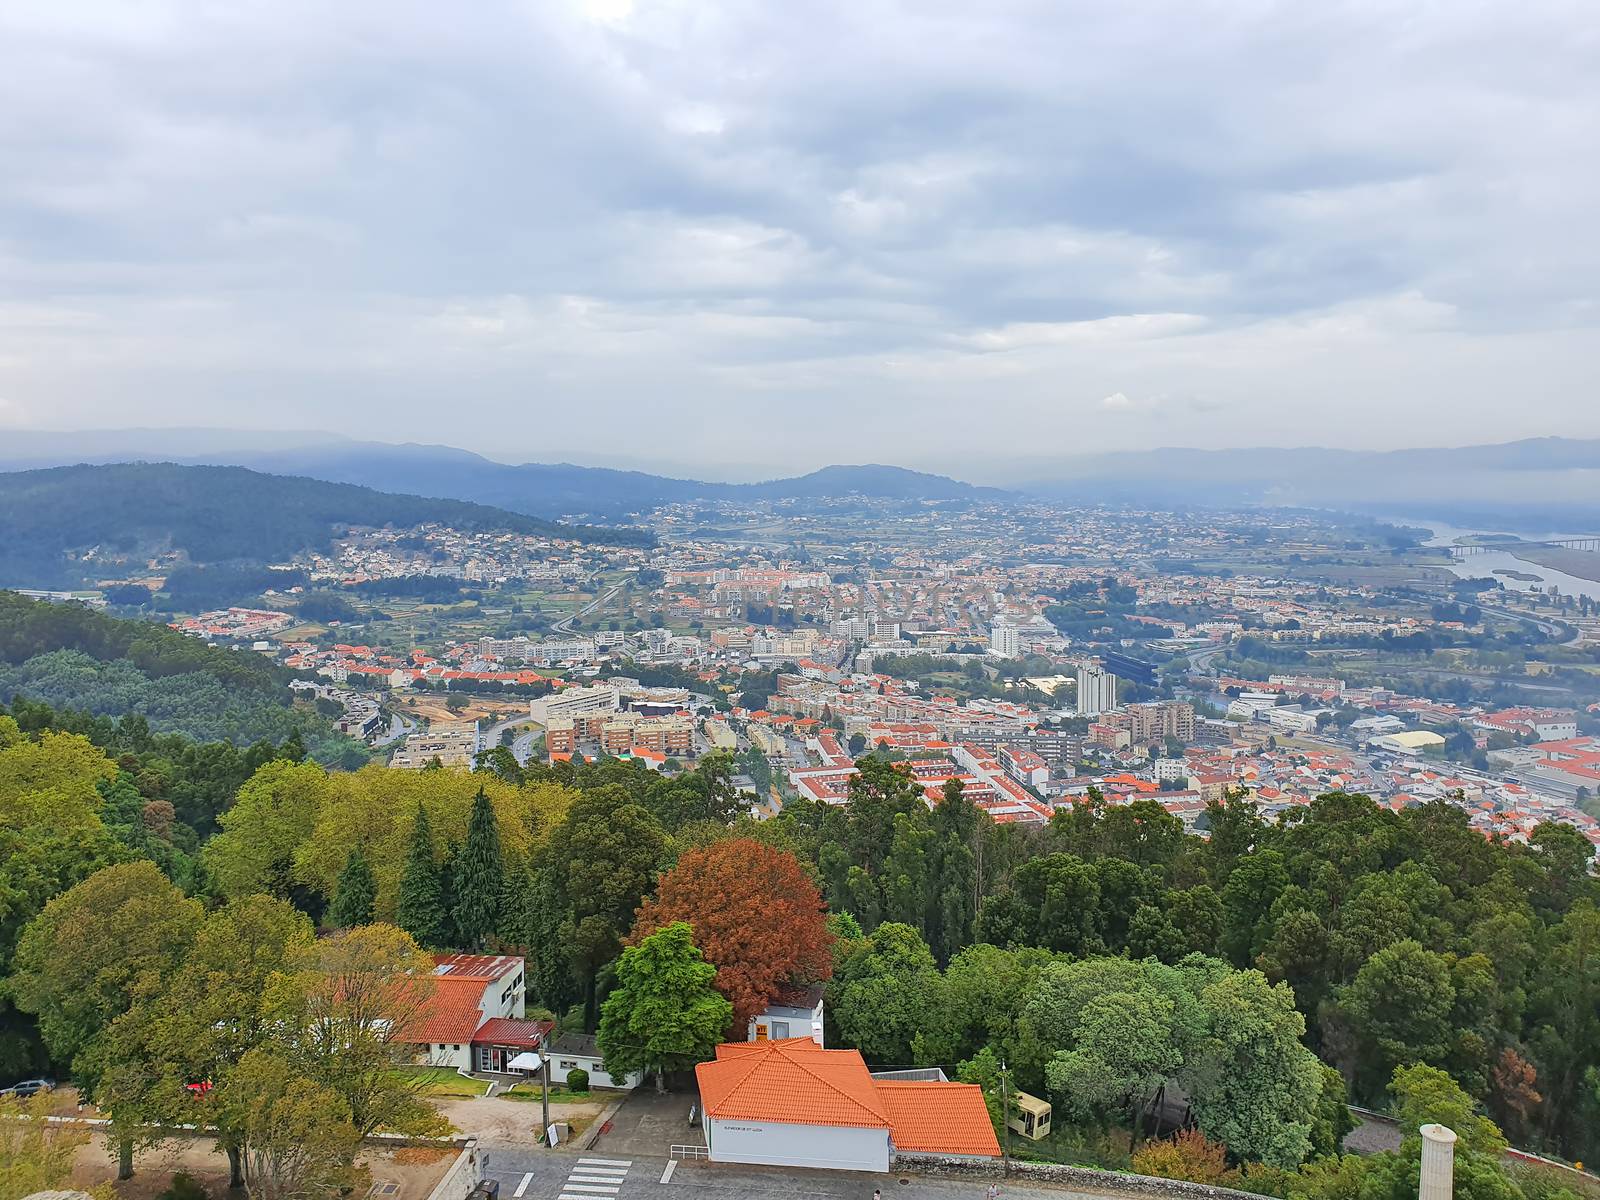 Panorama view of Portuguese city from the hill by savcoco